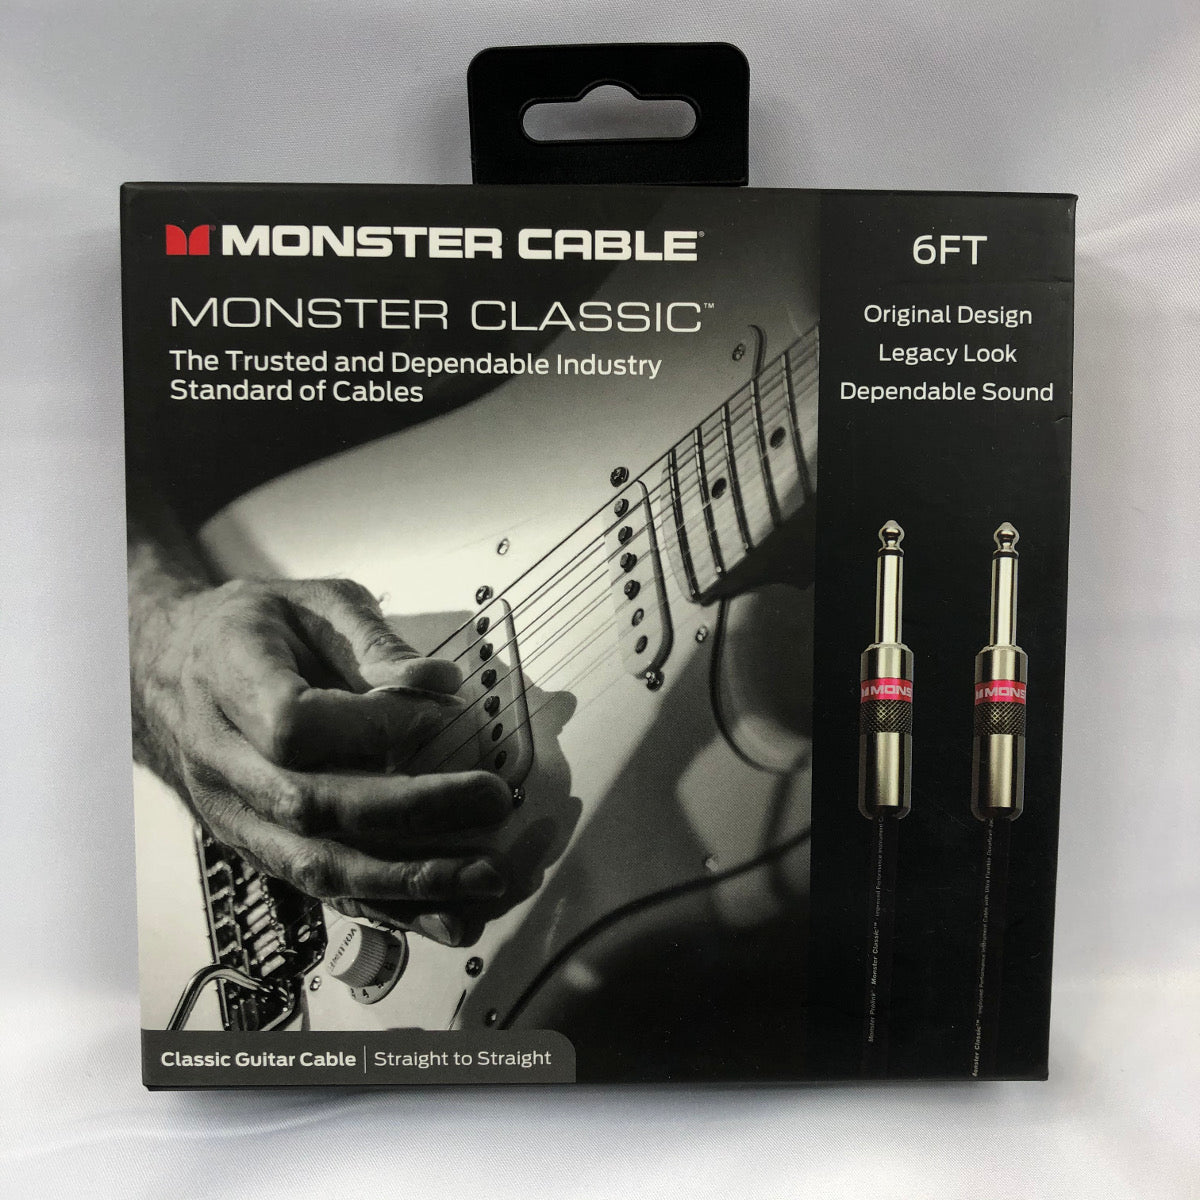 Monster Prolink Monster Classic Instrument Cable - 6 ft - Straight to Straight